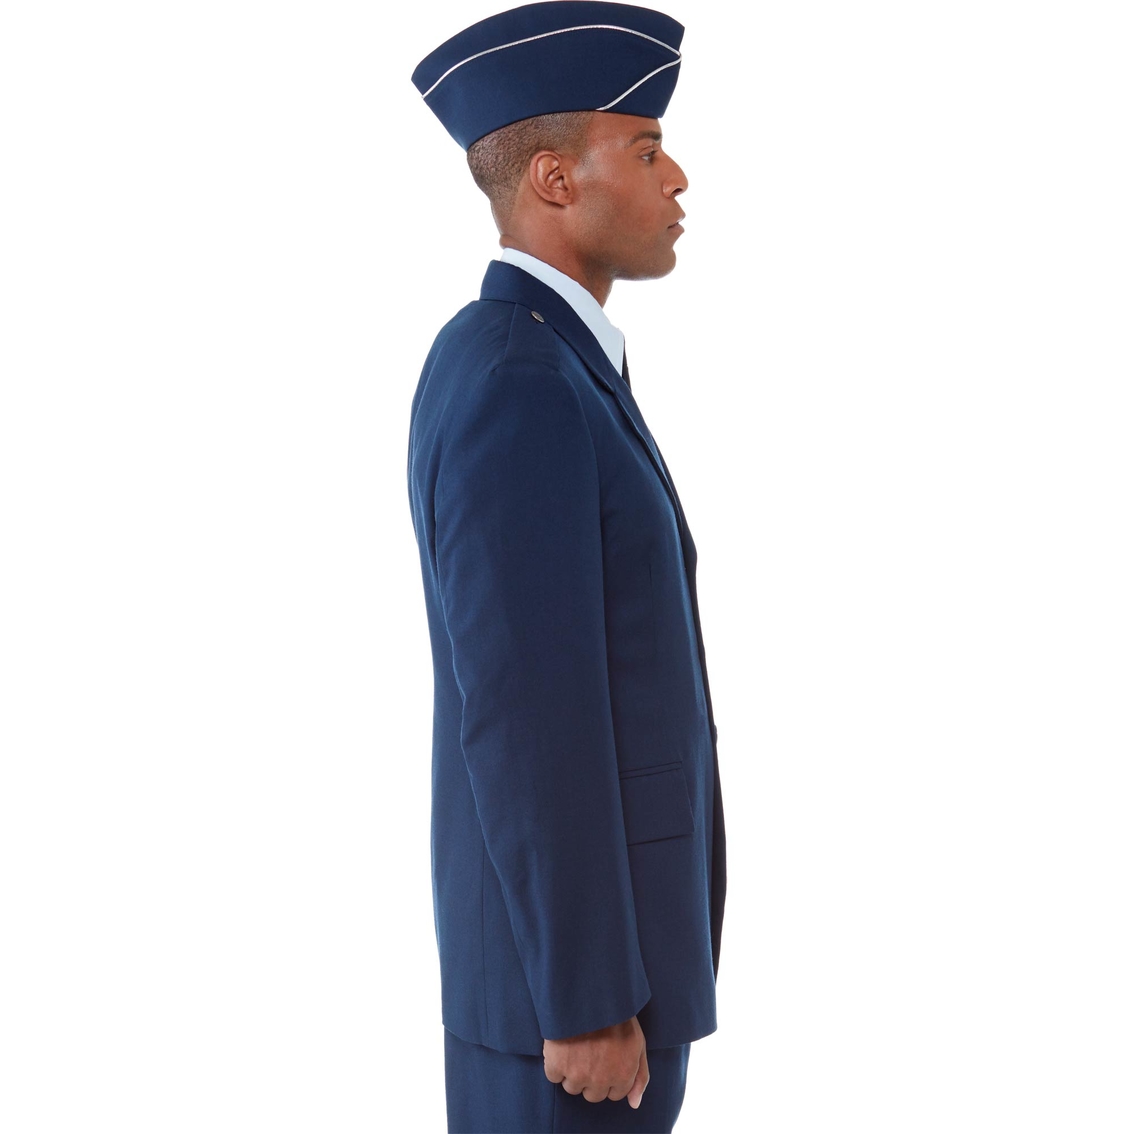 Air Force Officer Service Dress Coat - Image 4 of 4